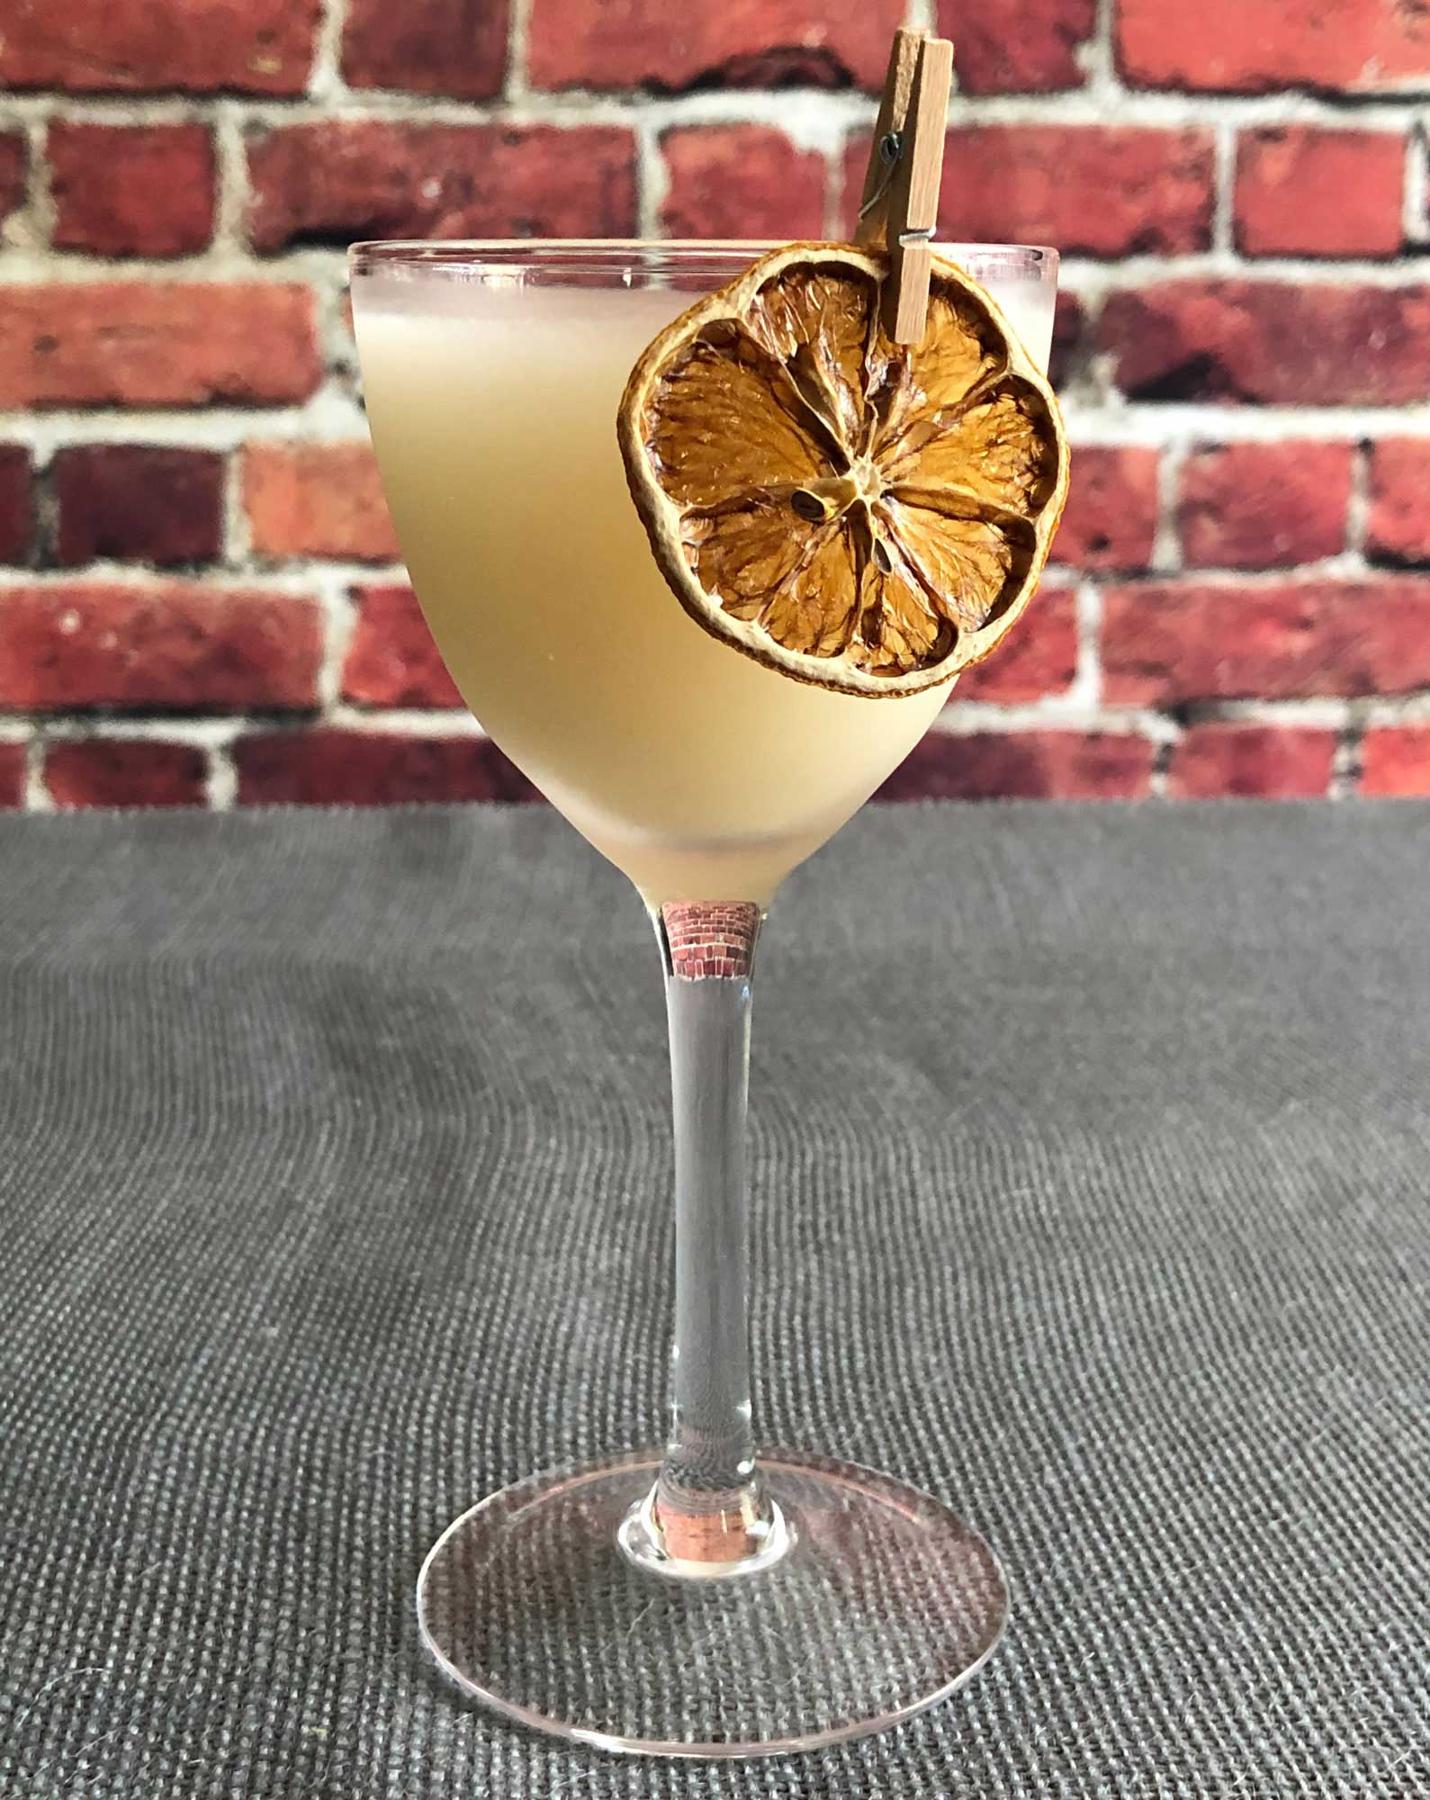 An example of the Royal Hawaiian, the mixed drink (drink) featuring Hayman’s Royal Dock Navy Strength Gin, pineapple juice, orgeat, lemon juice, and pineapple wedge; photo by Lee Edwards